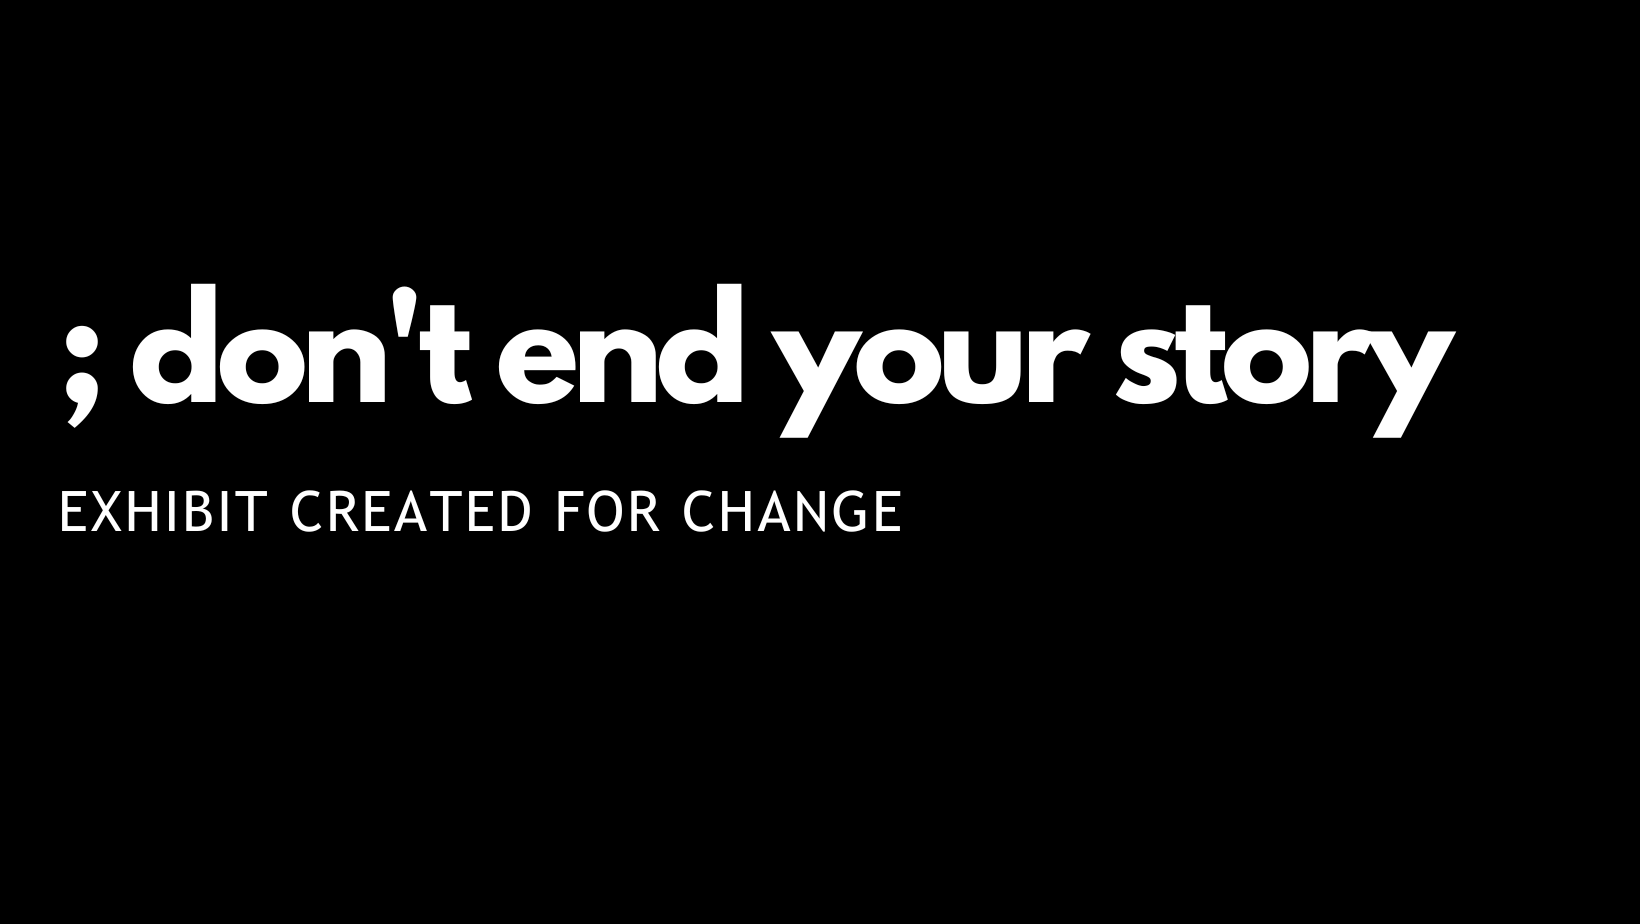 ; don’t end your story exhibit created for change